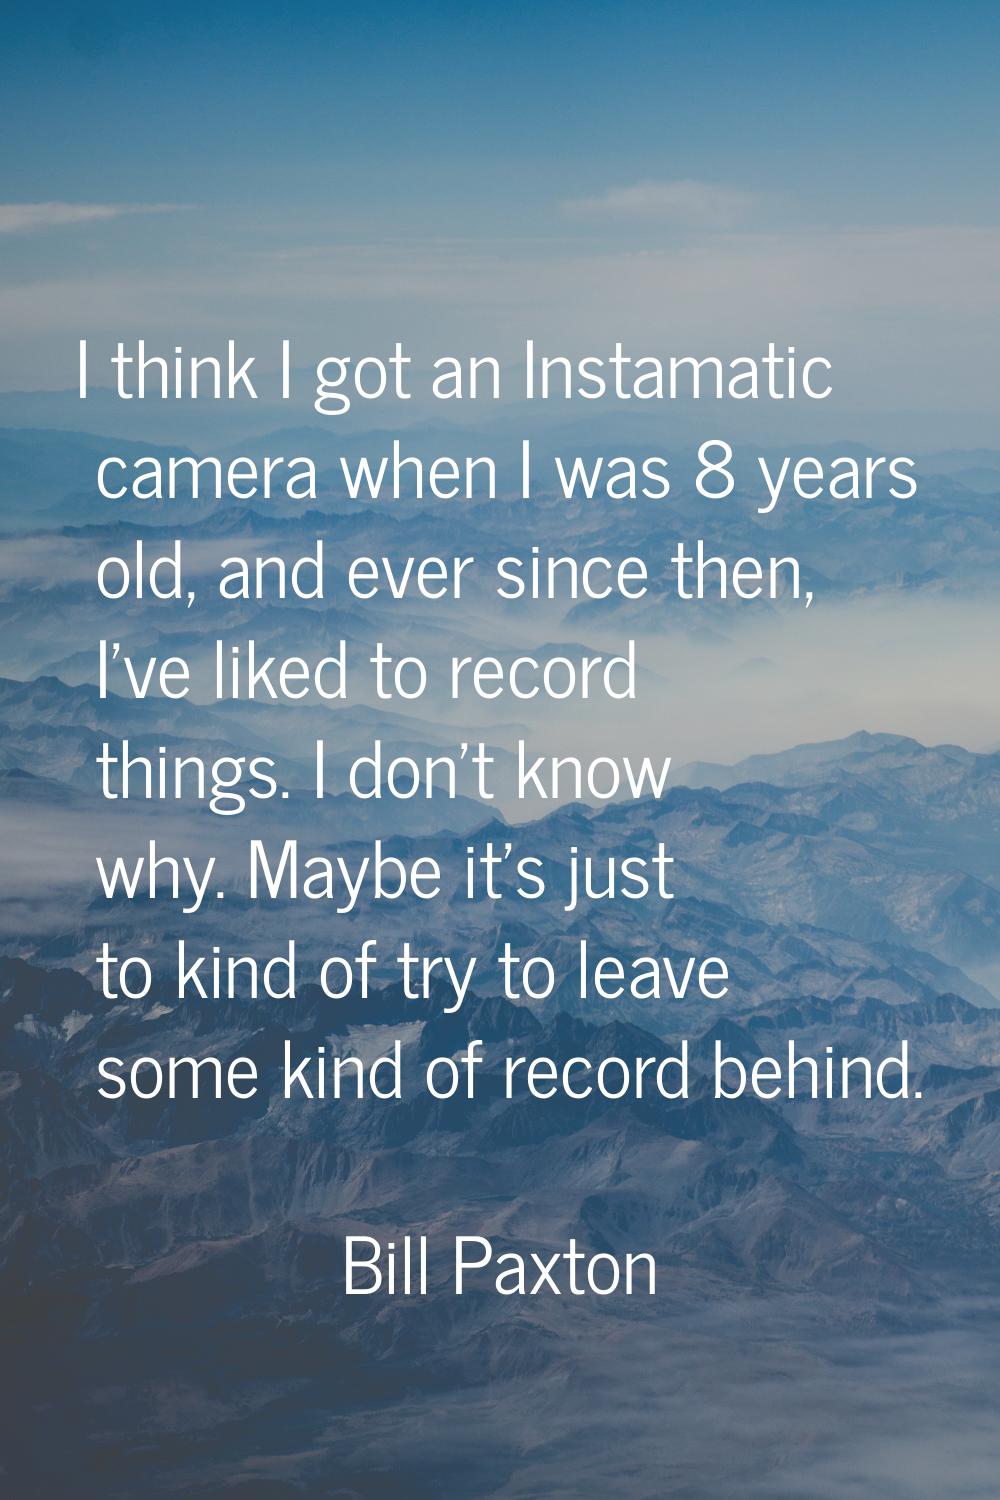 I think I got an Instamatic camera when I was 8 years old, and ever since then, I've liked to recor